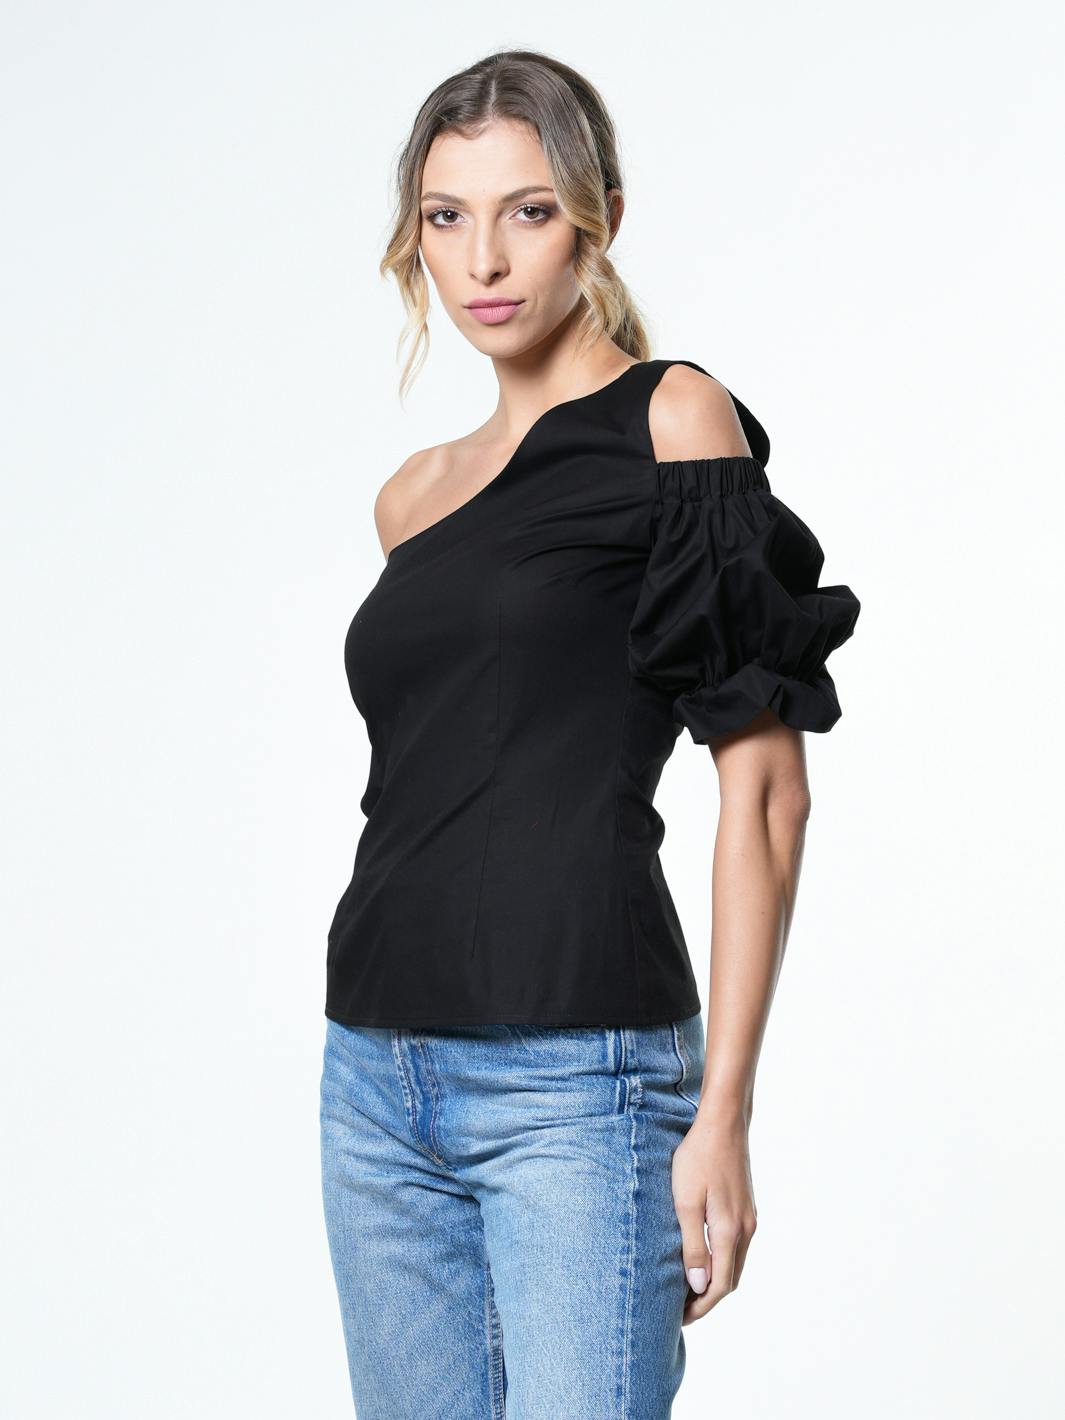 Extravagant One Sleeve Top , a product by METAMORPHOZA